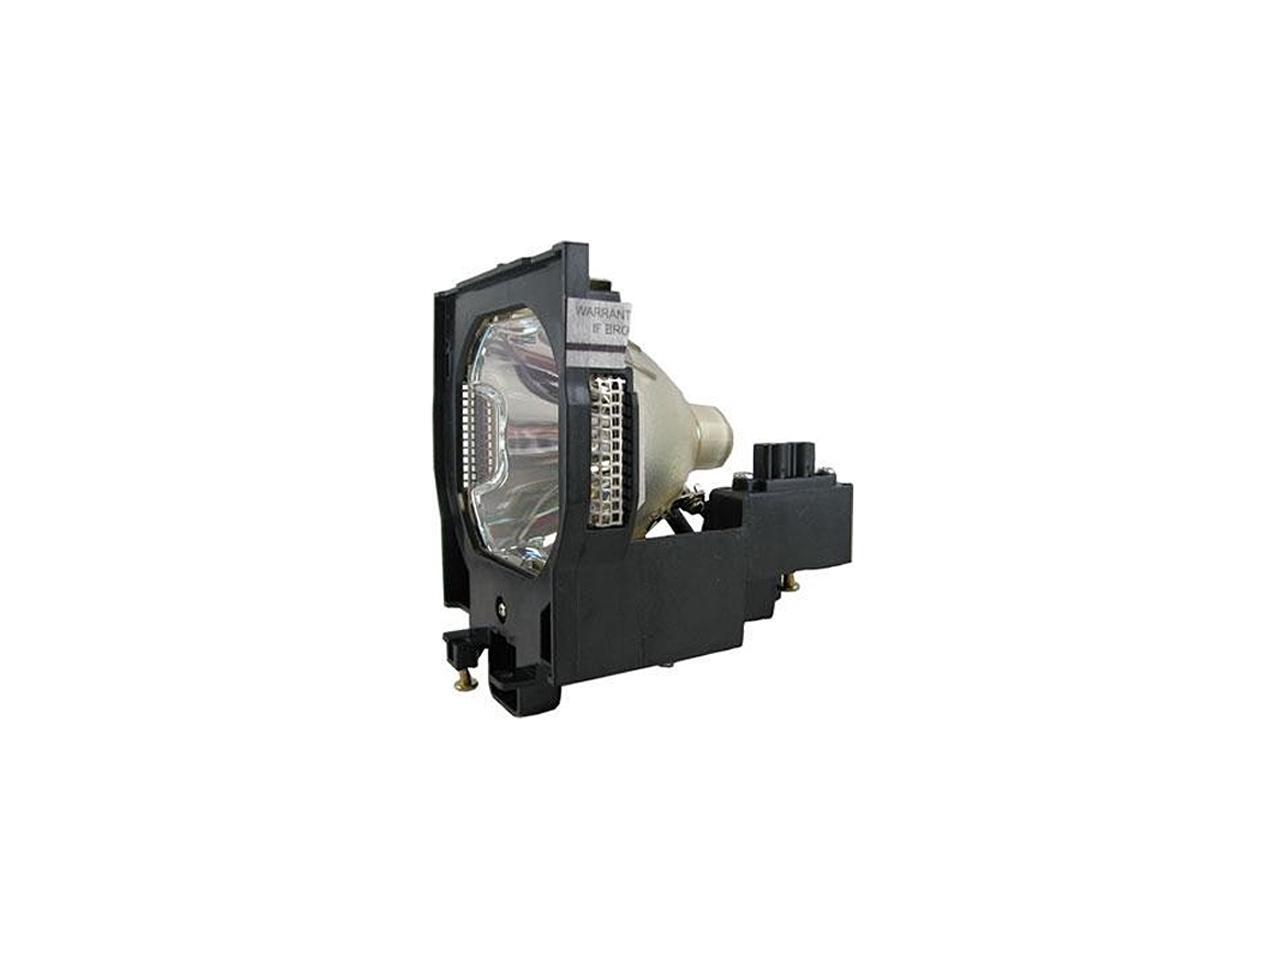 Replacement Projector Lamp For Christie Lu77, Lx100 Replaces 03-000709-01P